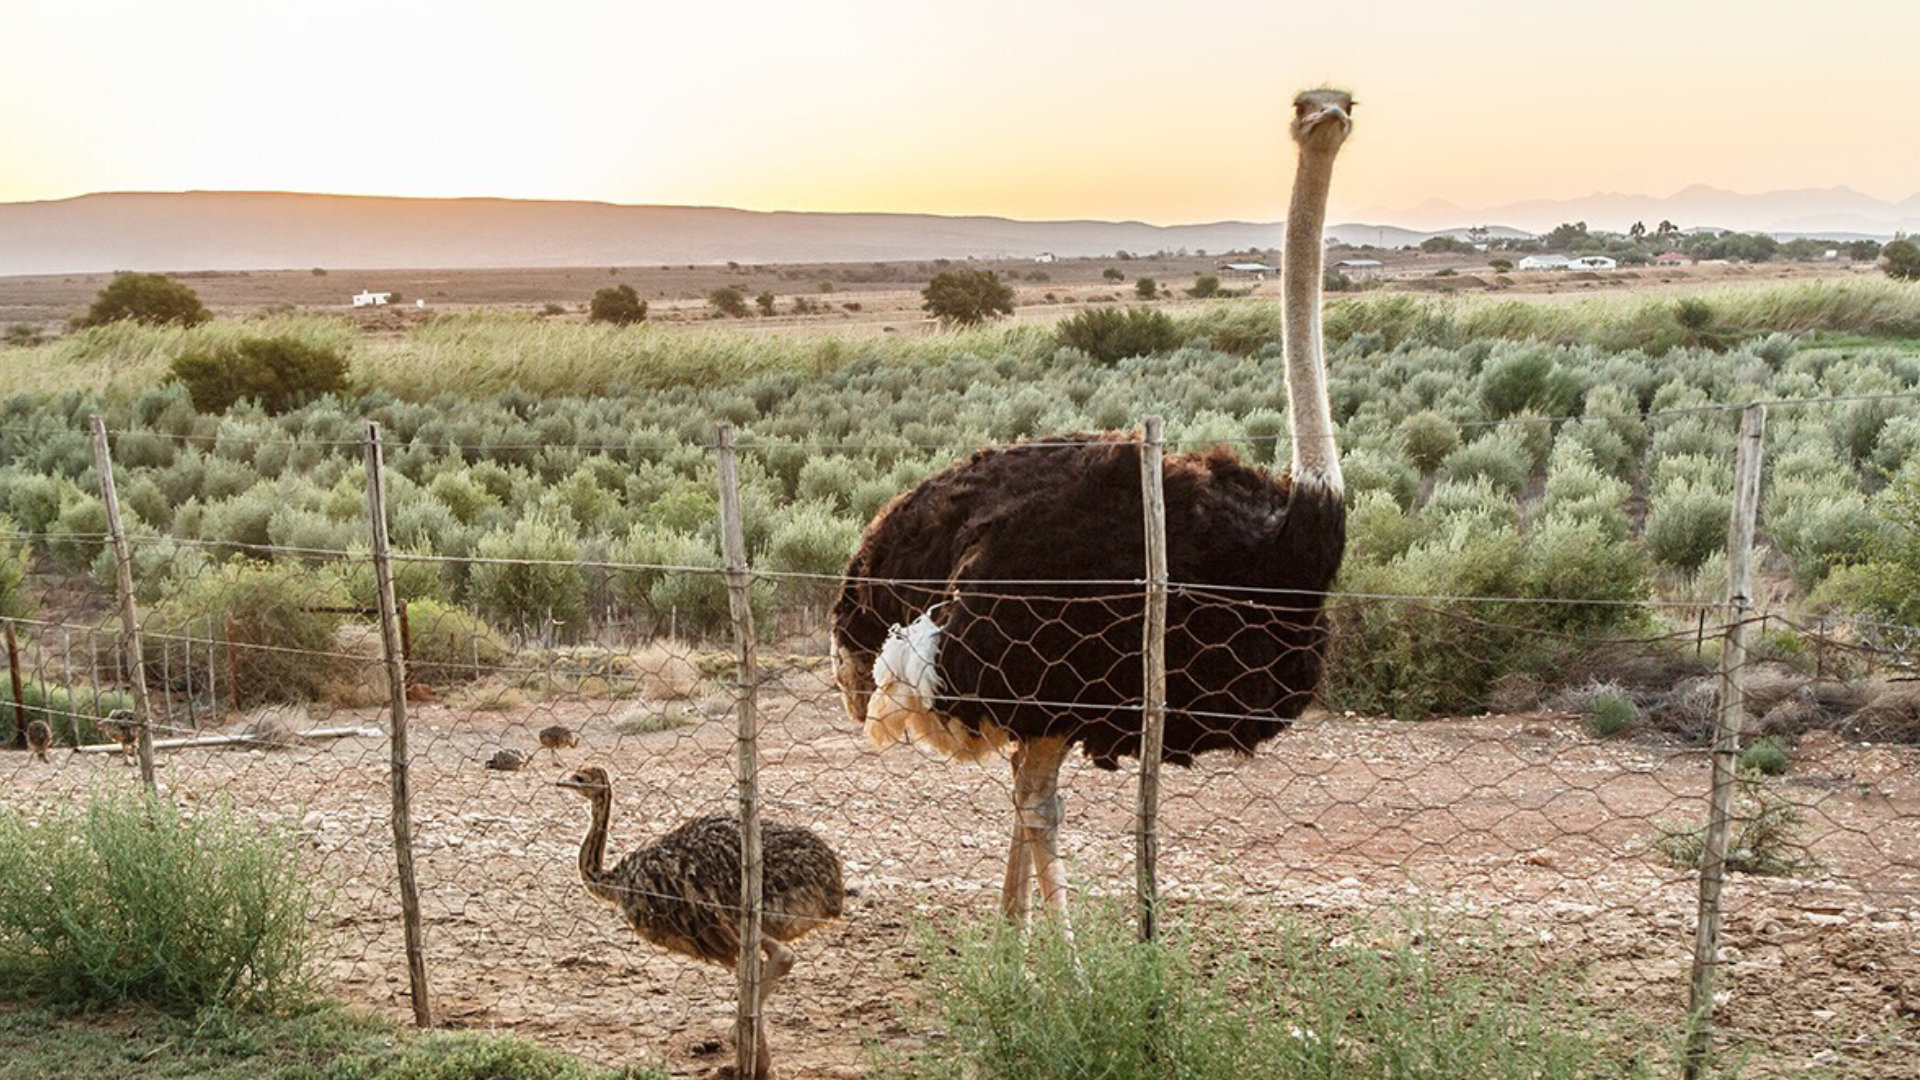 Ostriches in The Karoo